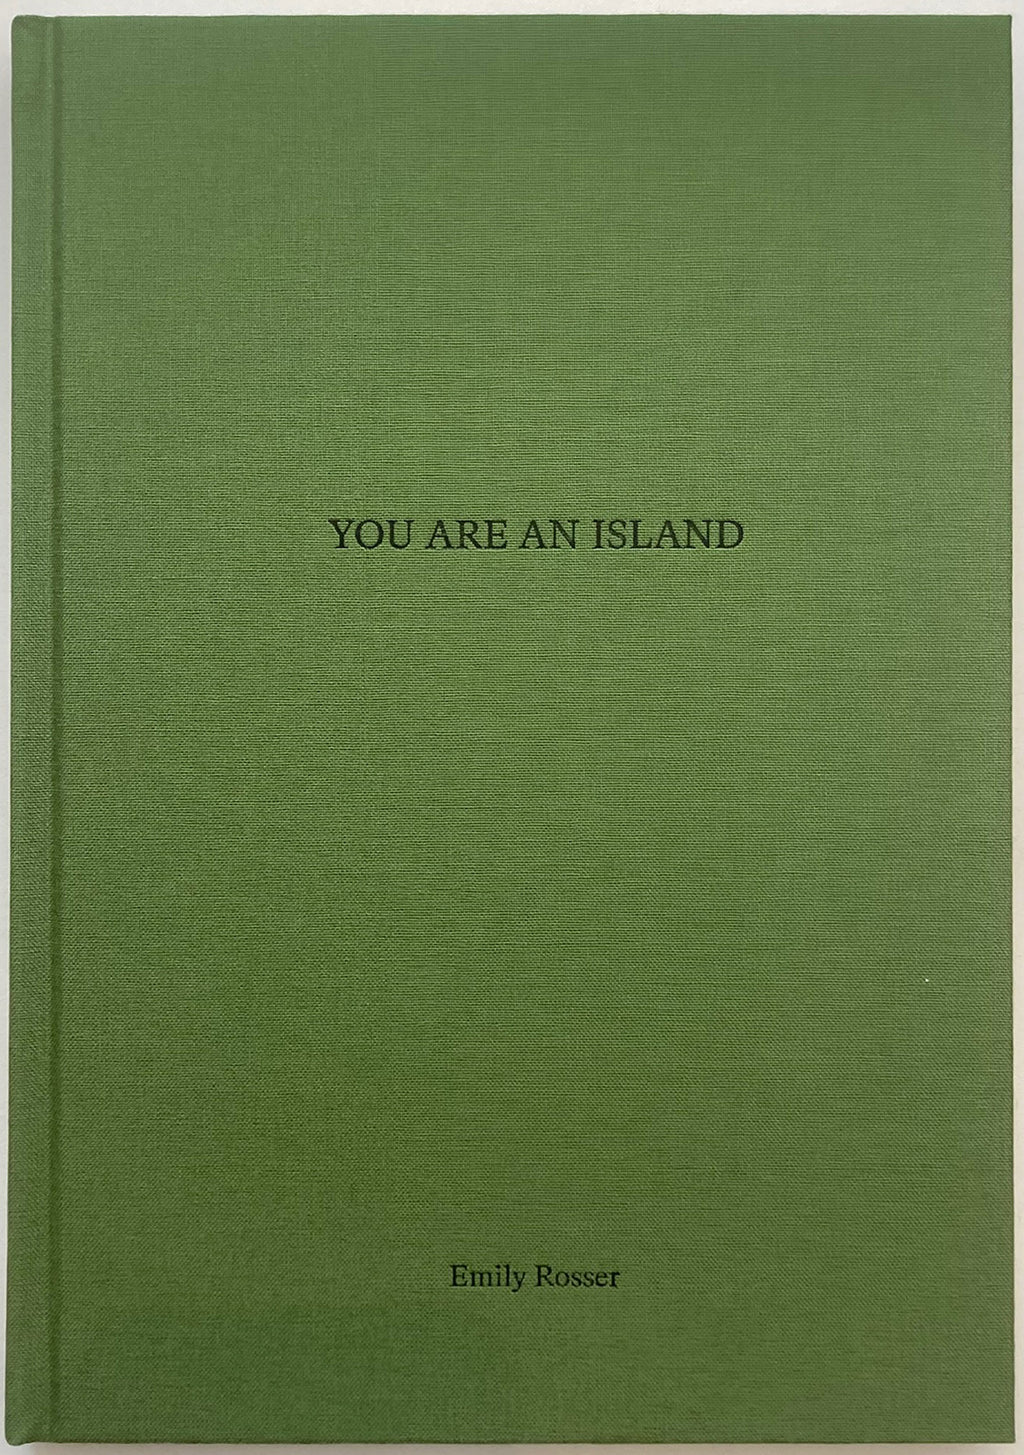 You are an Island by Emily Rosser